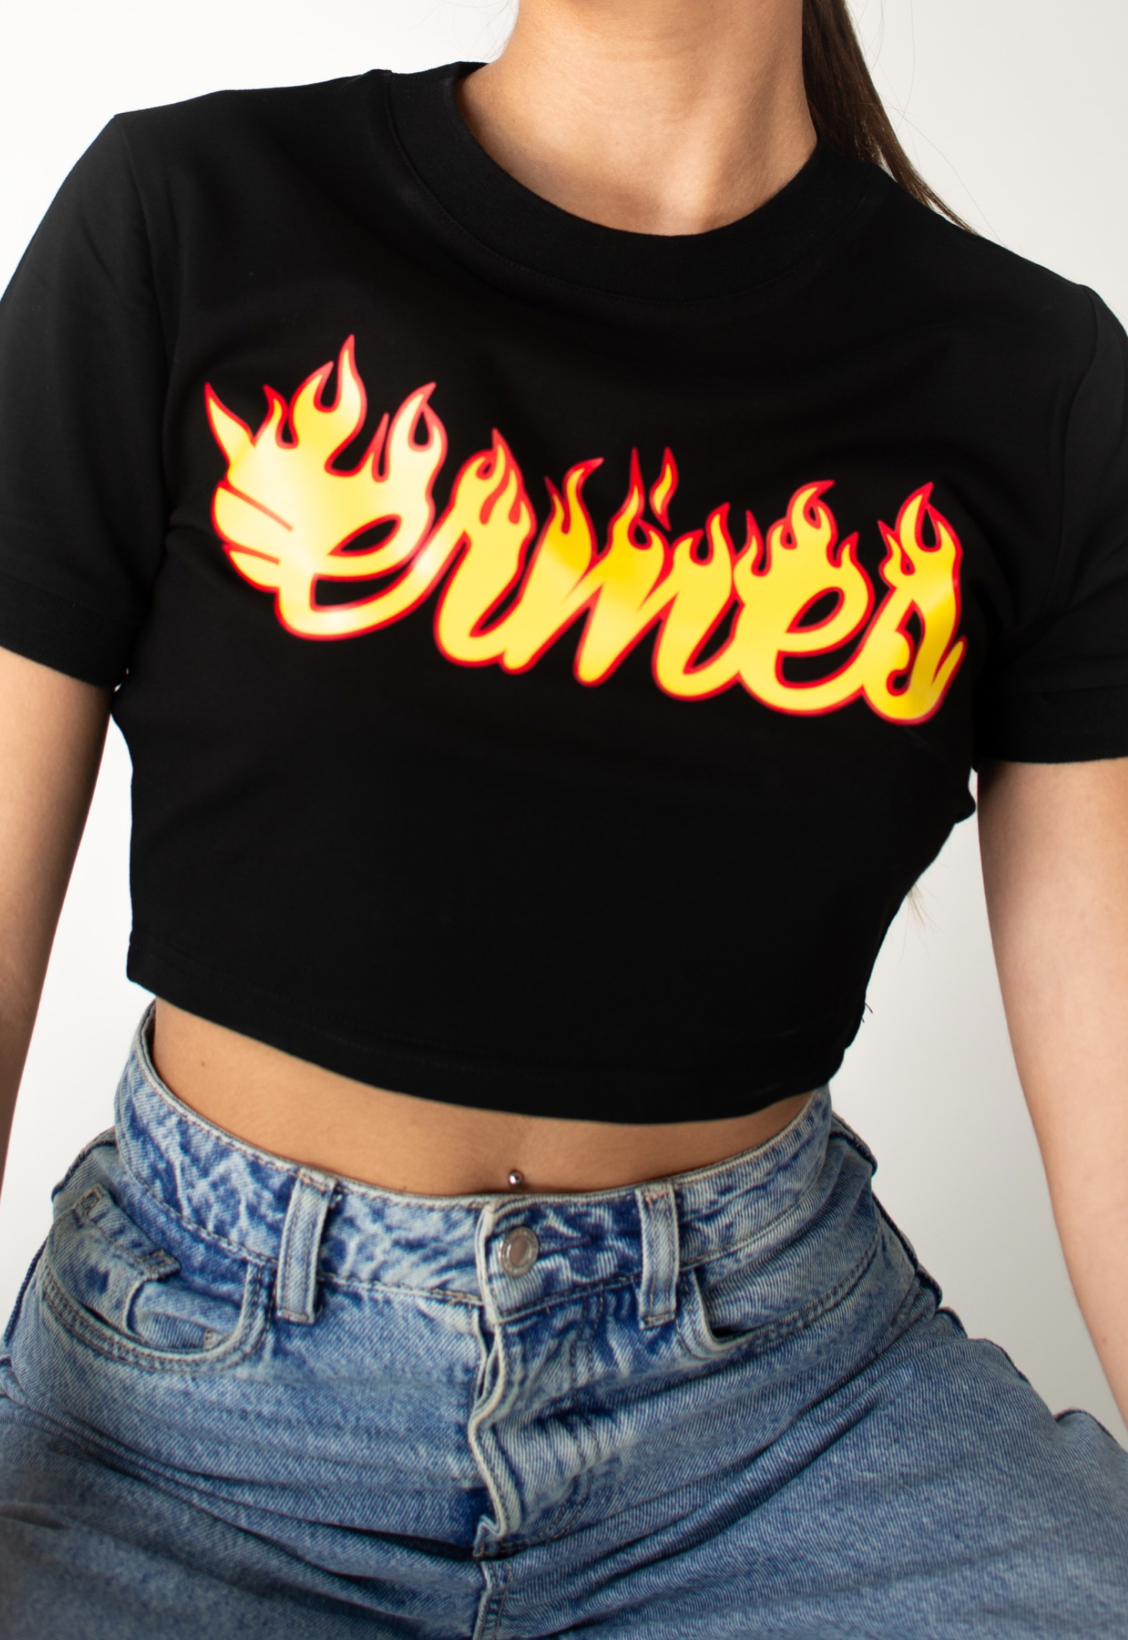 Ermes On Fire Top